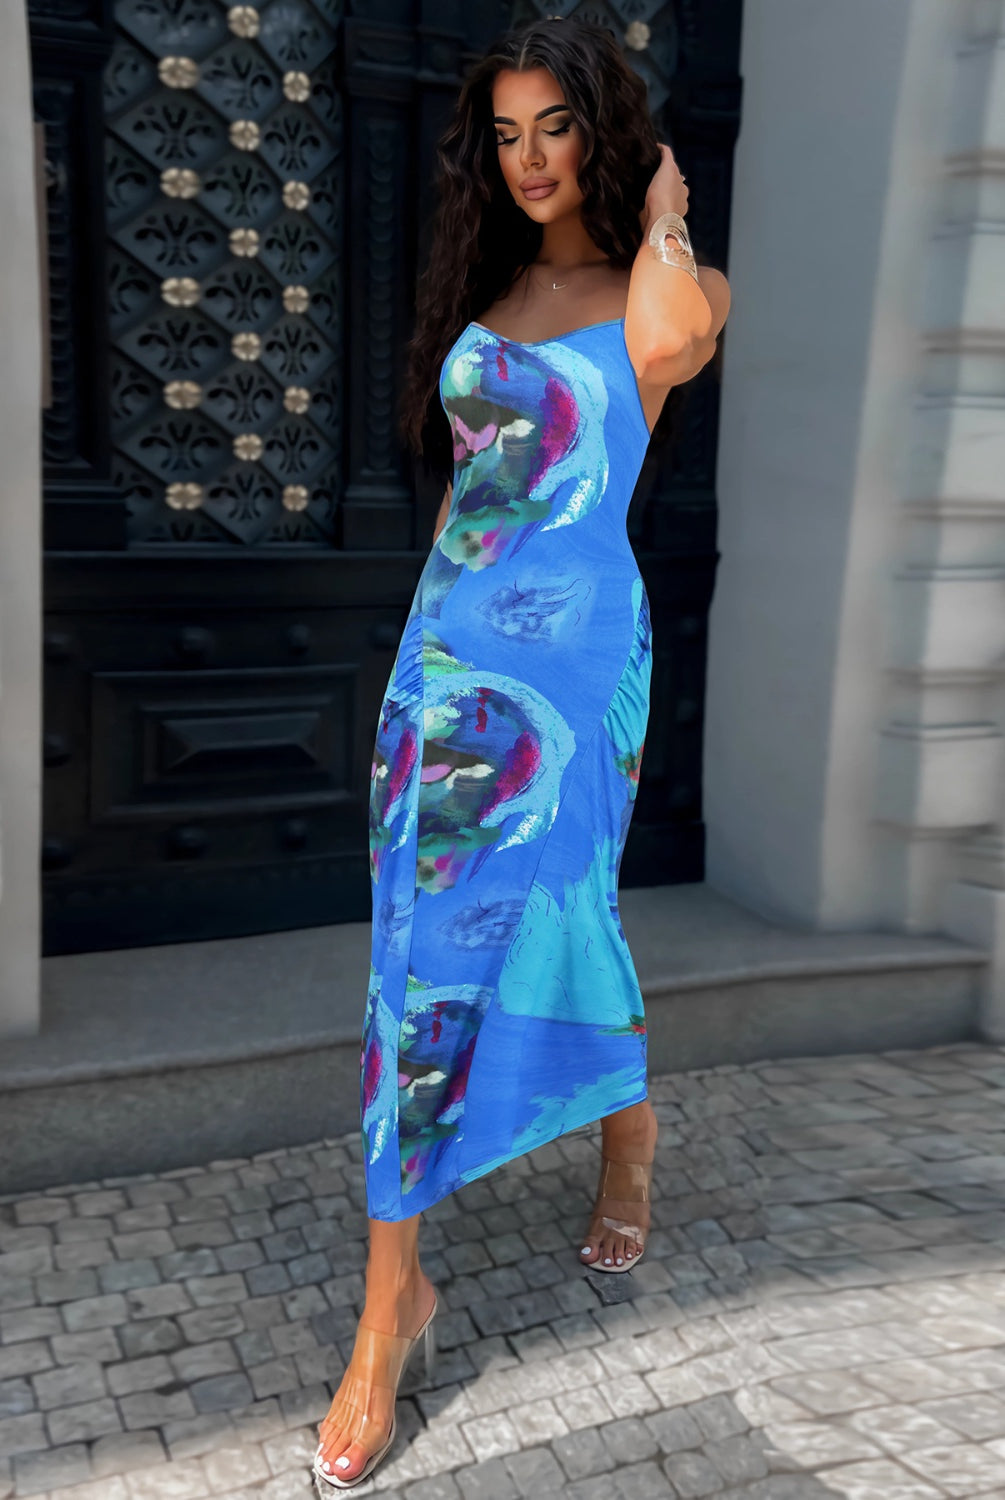 Woman wearing a printed spaghetti strap cami dress, paired with clear heels and holding a white bag.